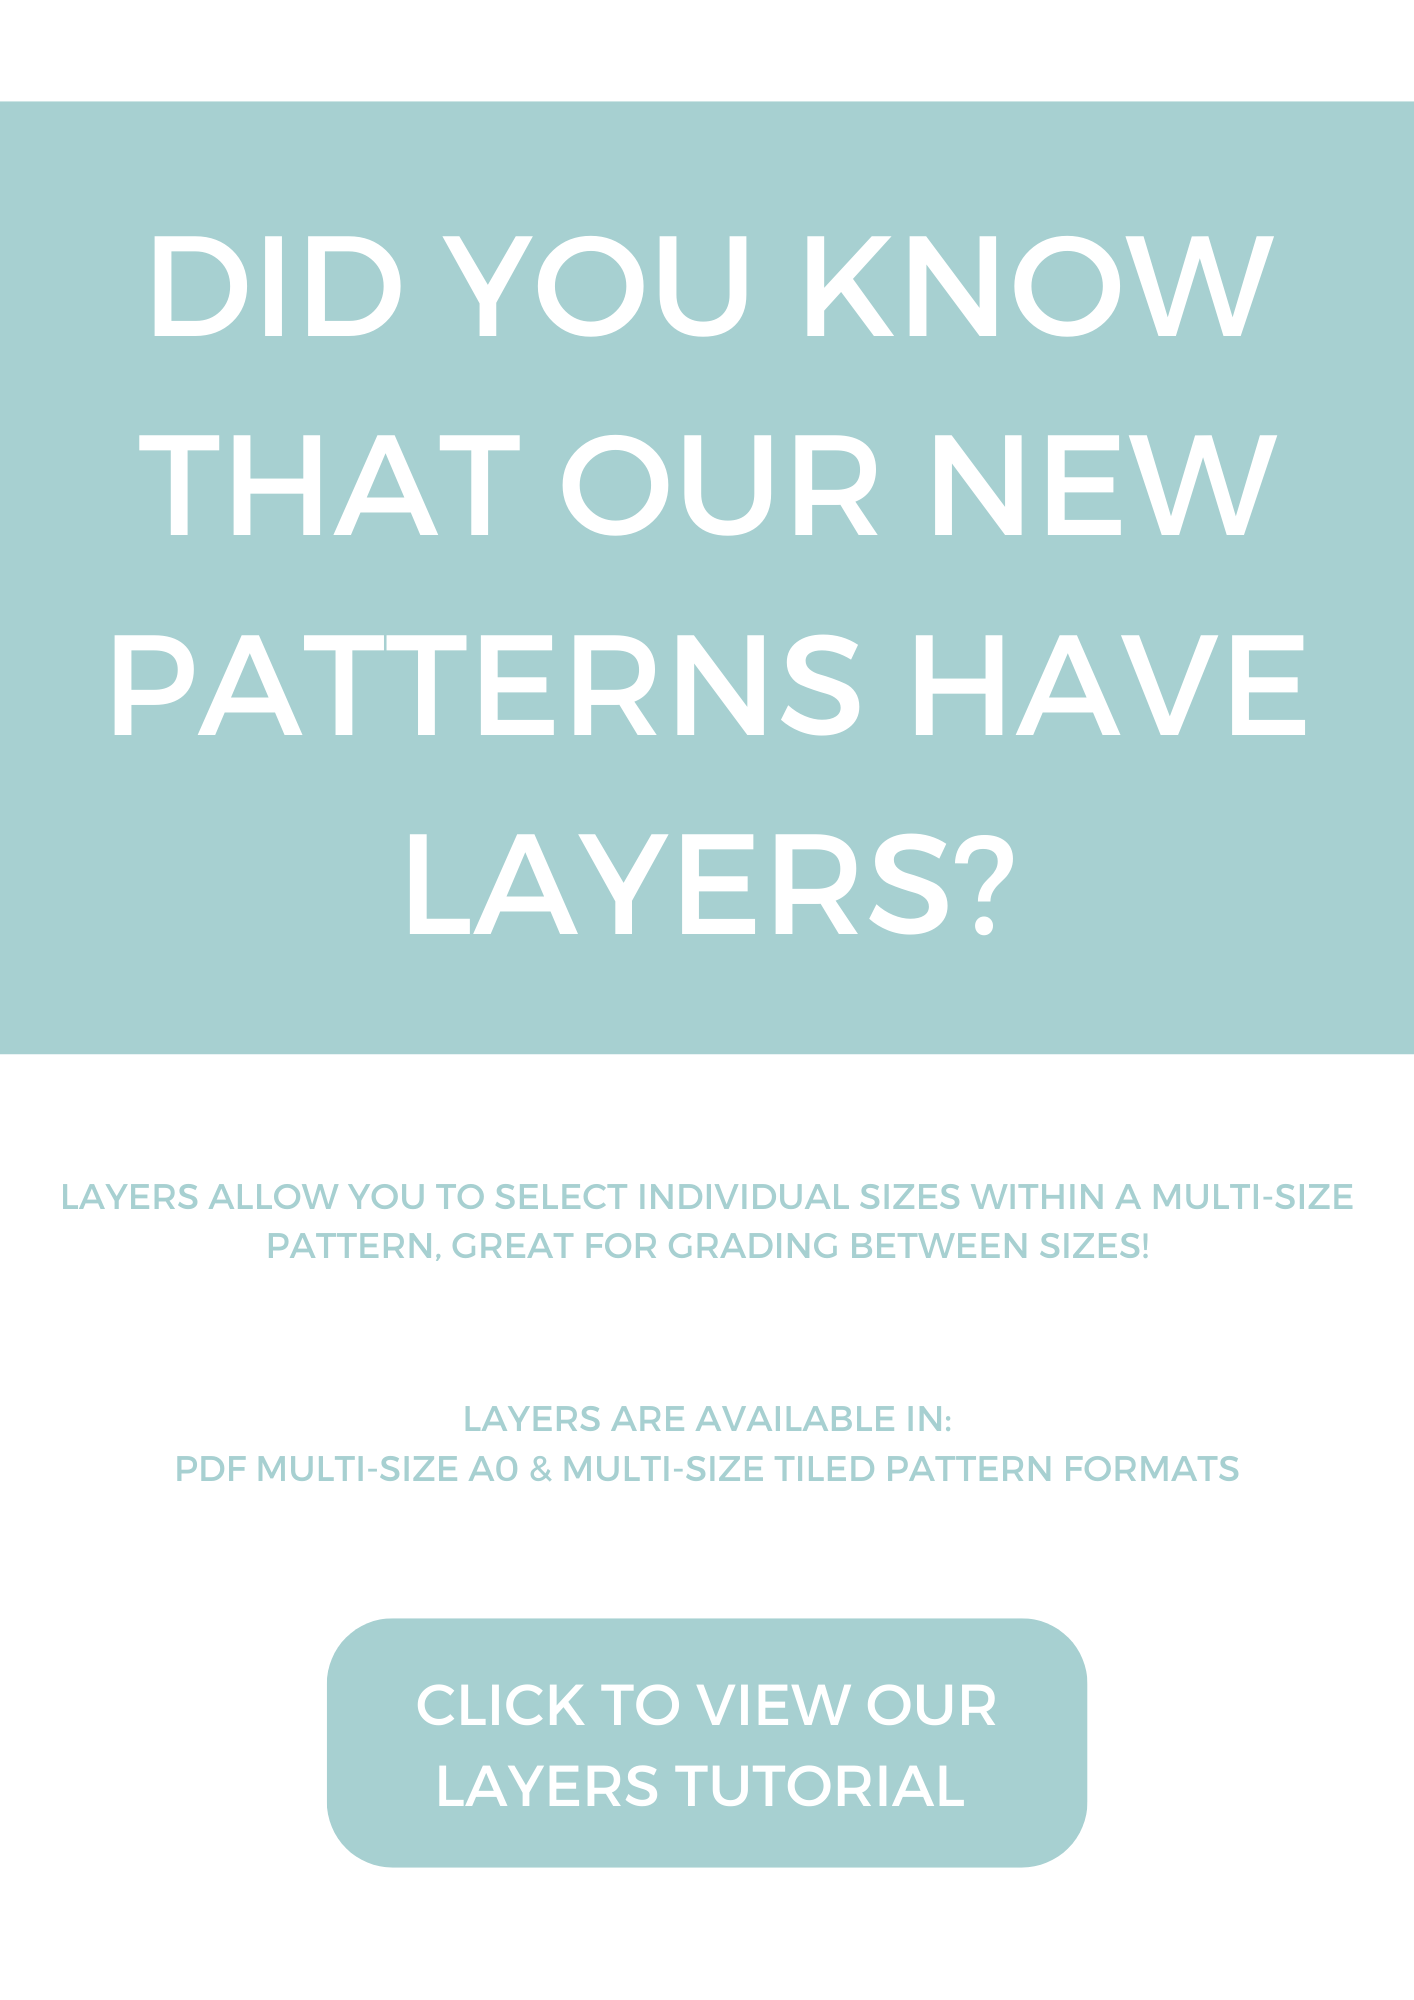 Layers in multi-size A0 & multi-size tiled new patterns